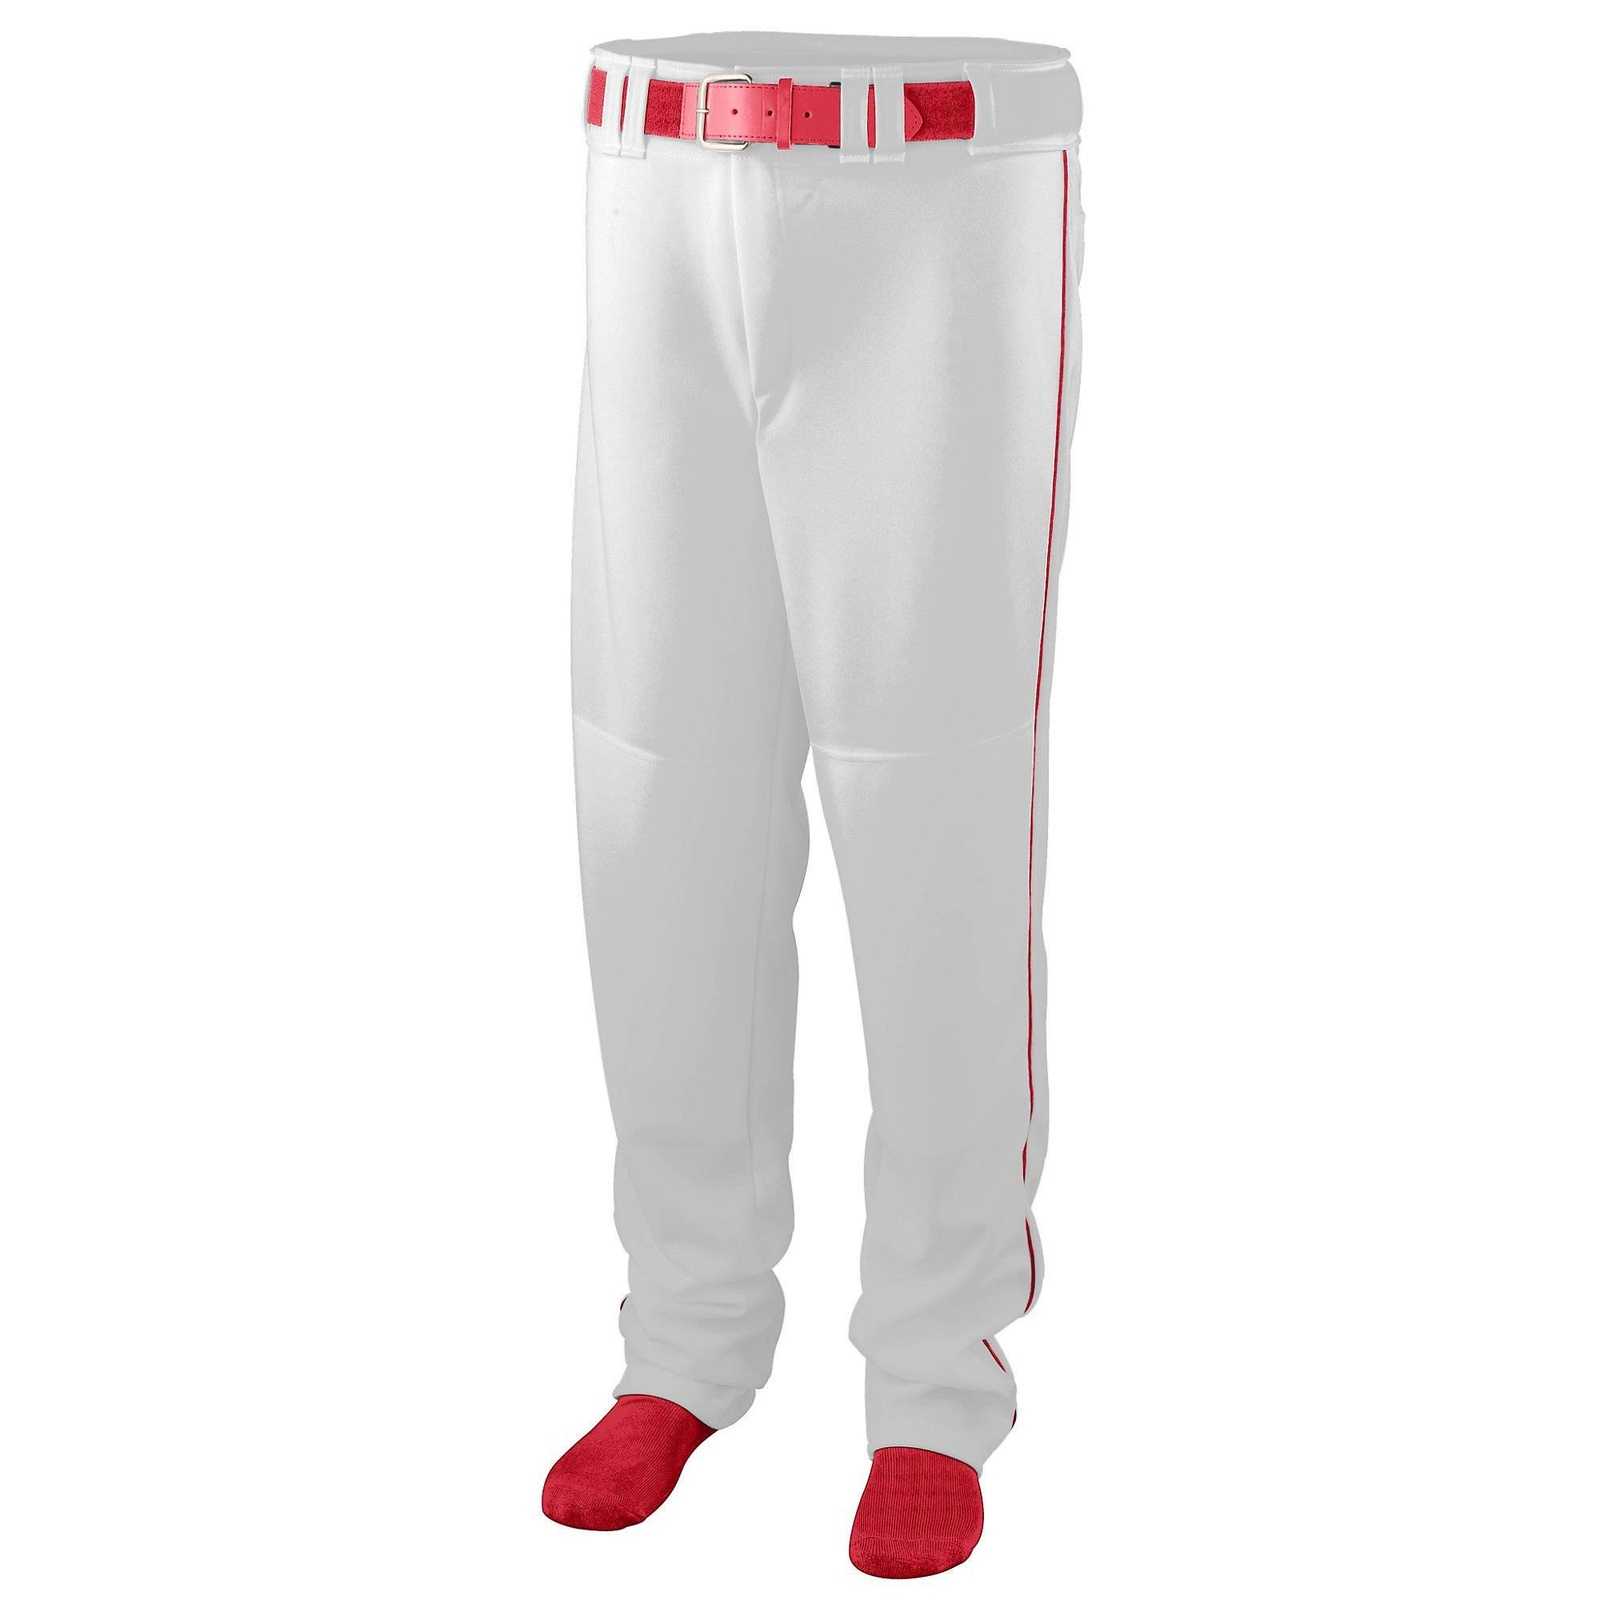 Augusta 1445 Series Baseball Softball Pant with Piping - White Red - HIT a Double